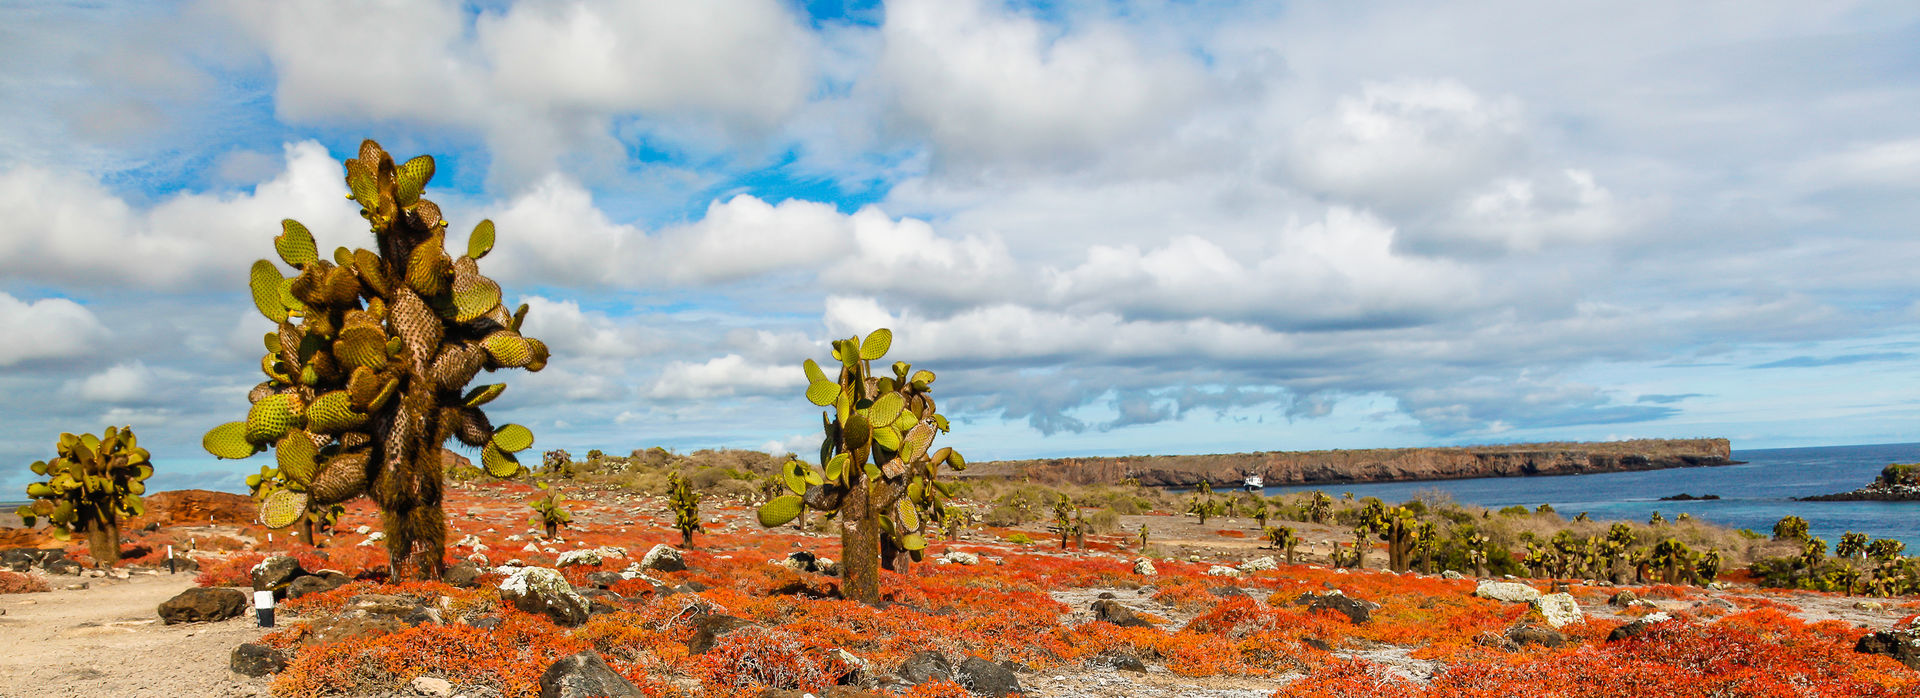 4 fascinating creatures to spot in the Galápagos